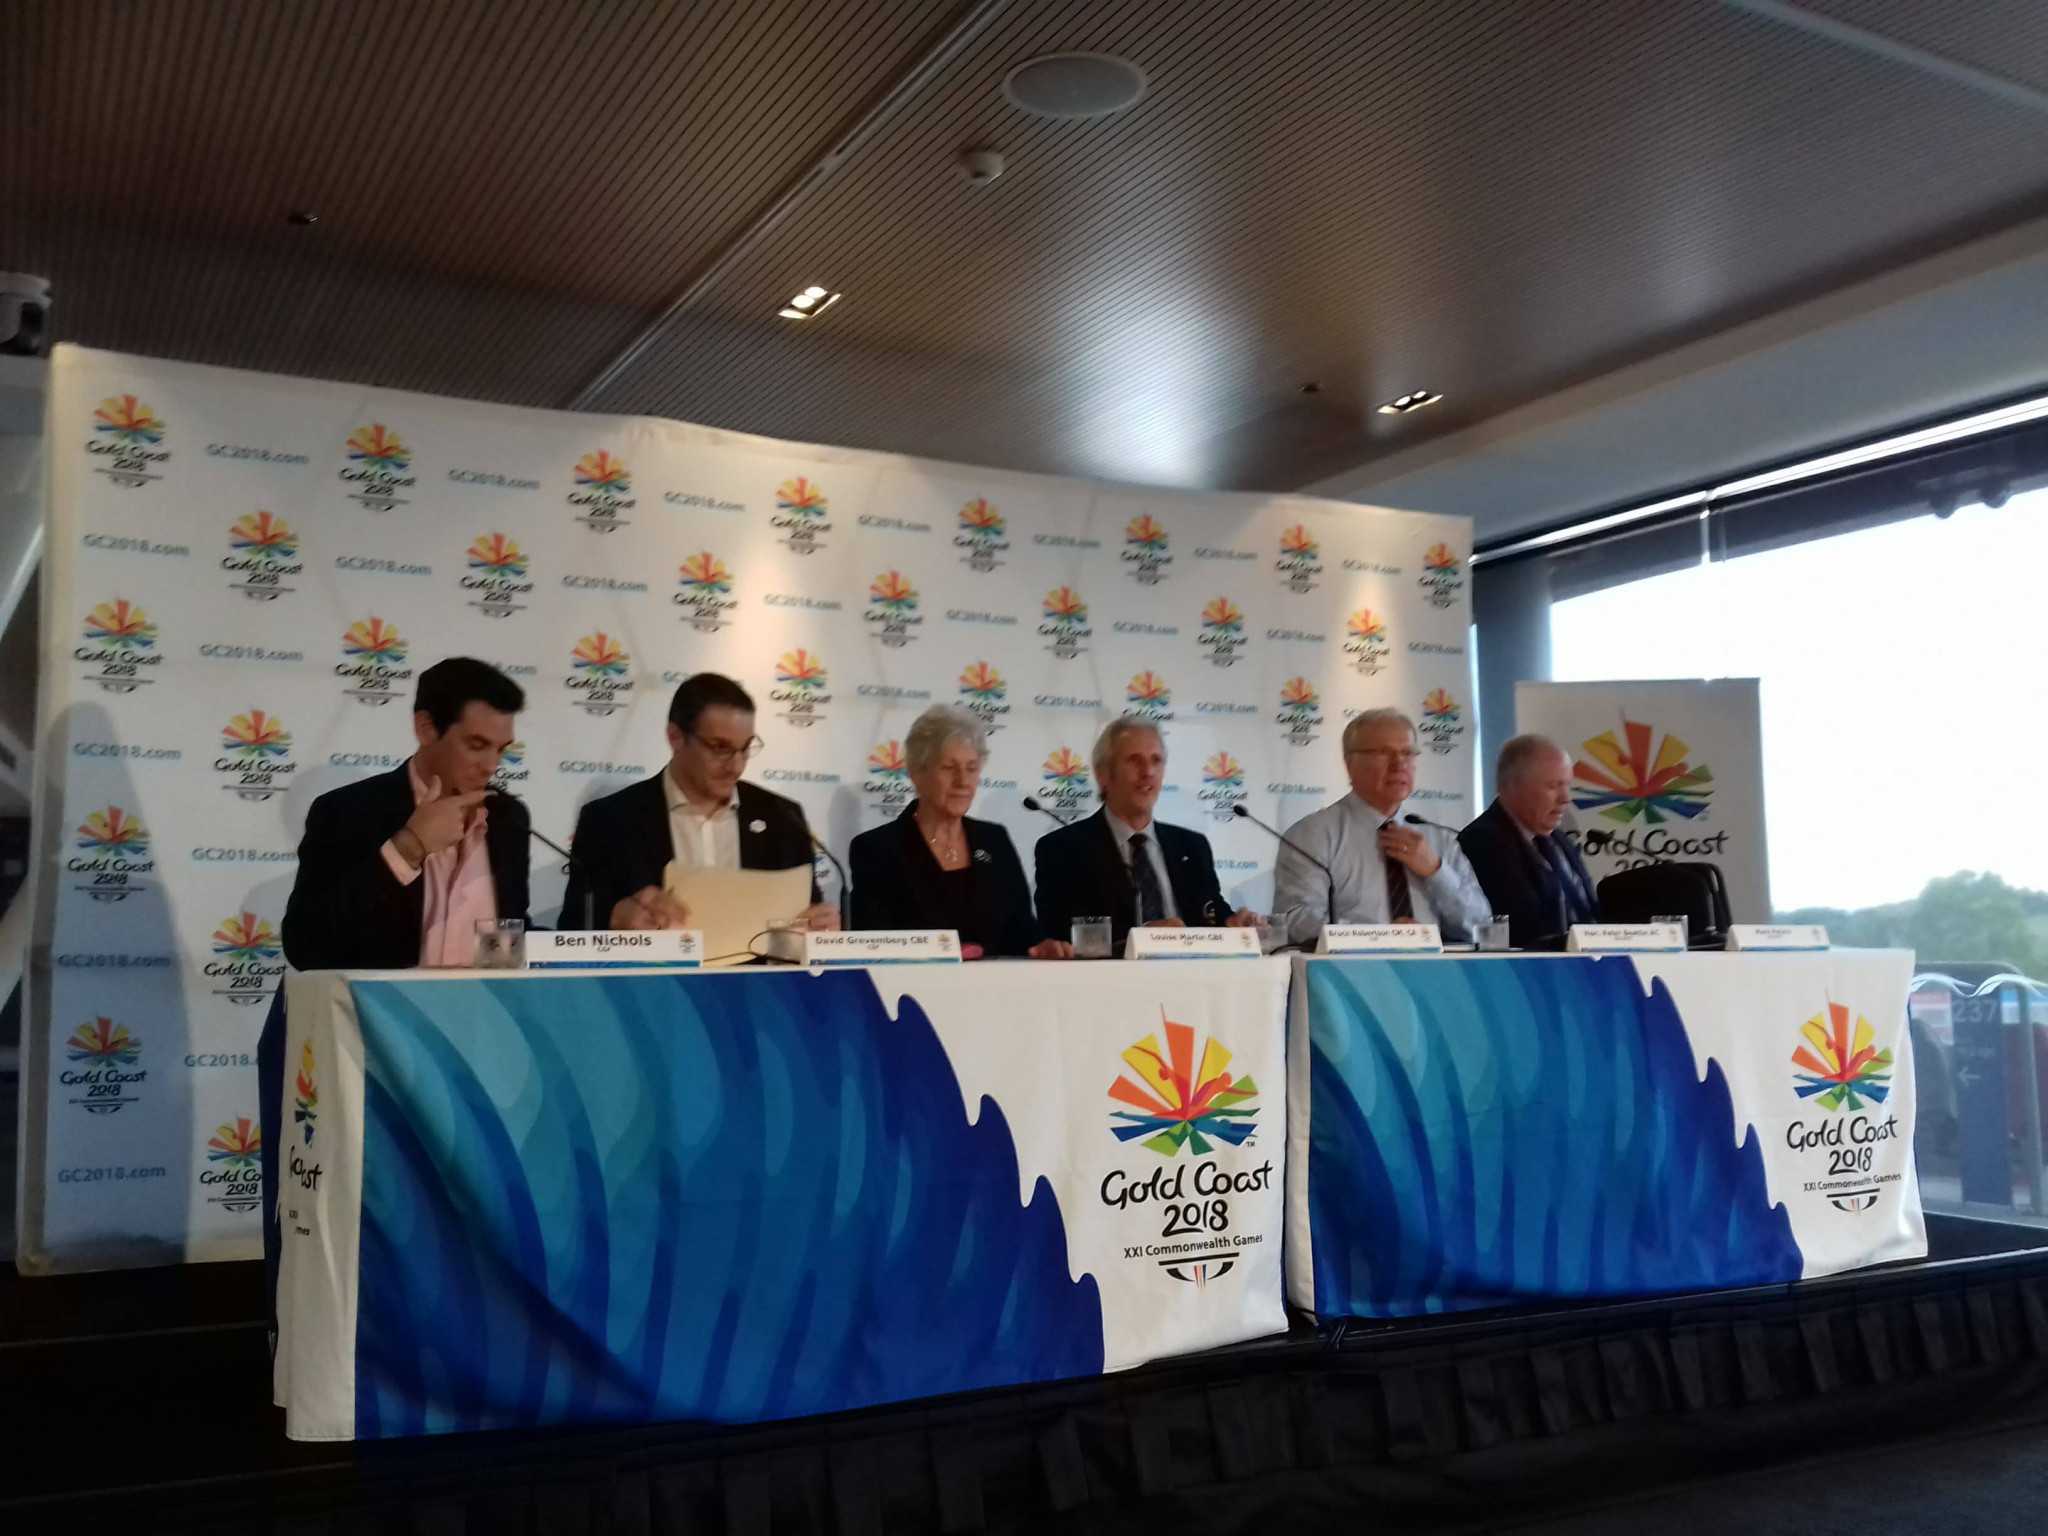 Coordination Commission chair claims Gold Coast 2018 have foundation to deliver excellent Commonwealth Games